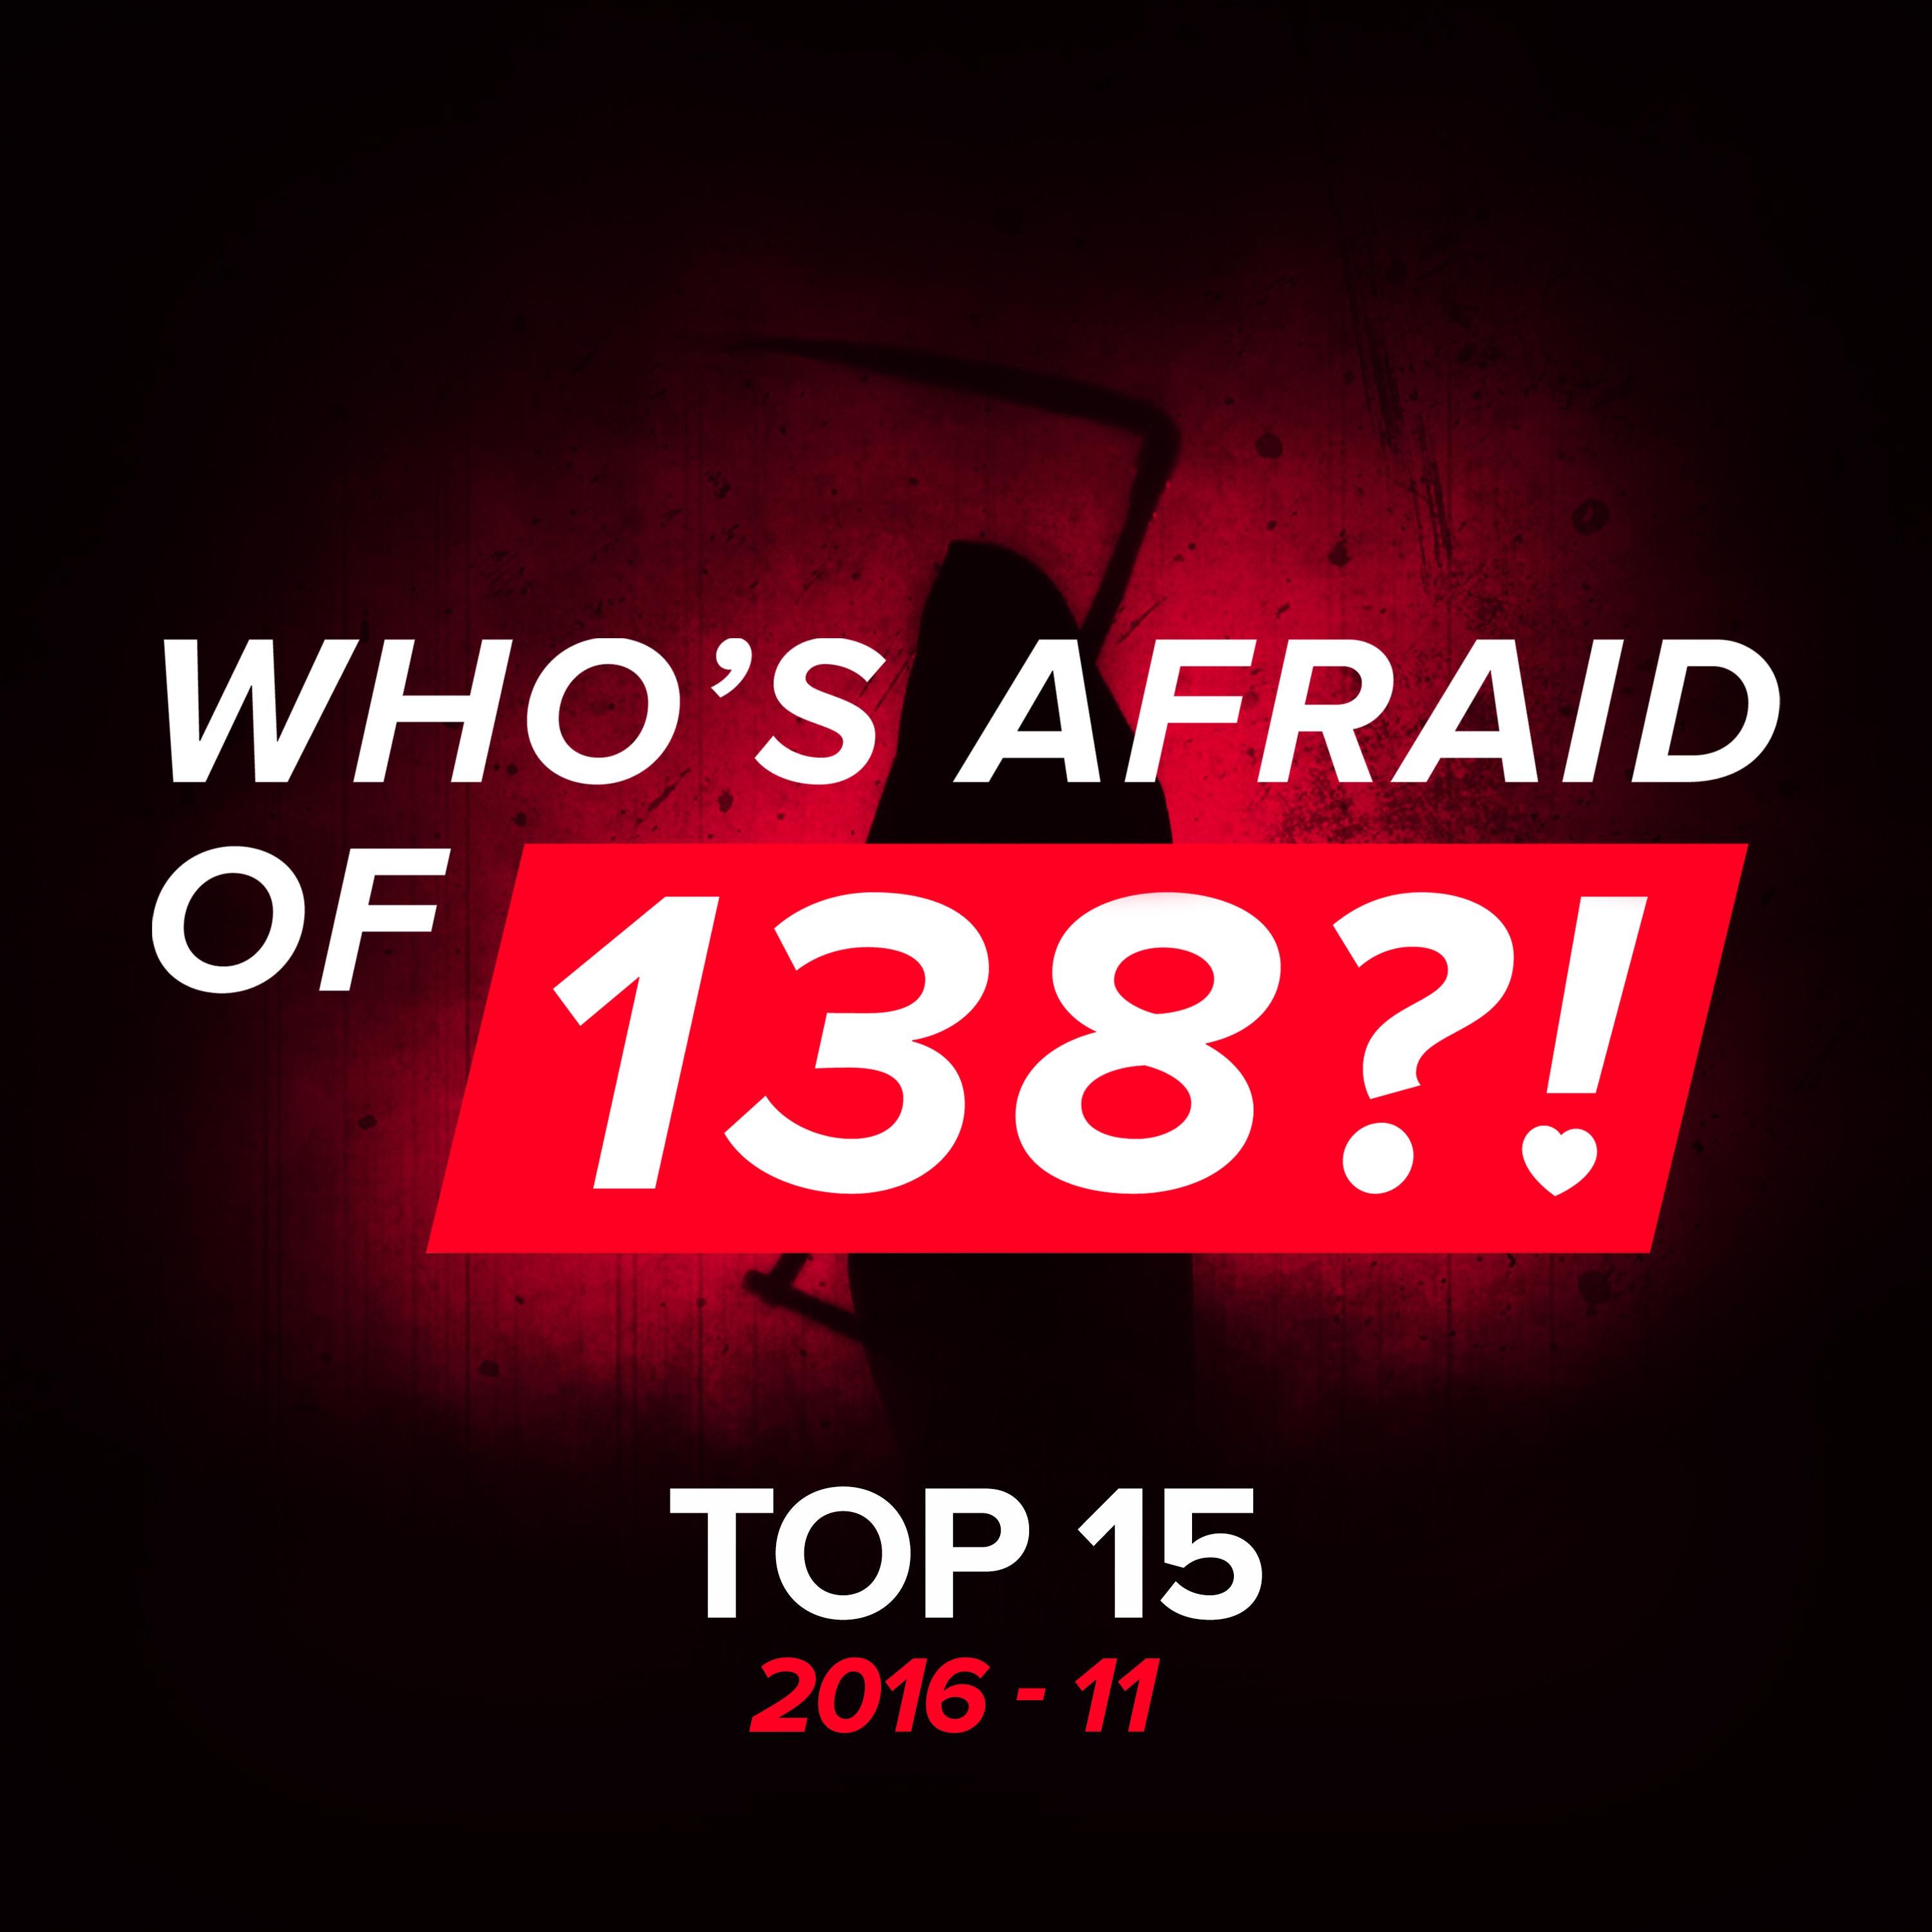 Who's Afraid Of 138?! Top 15 - 2016-11